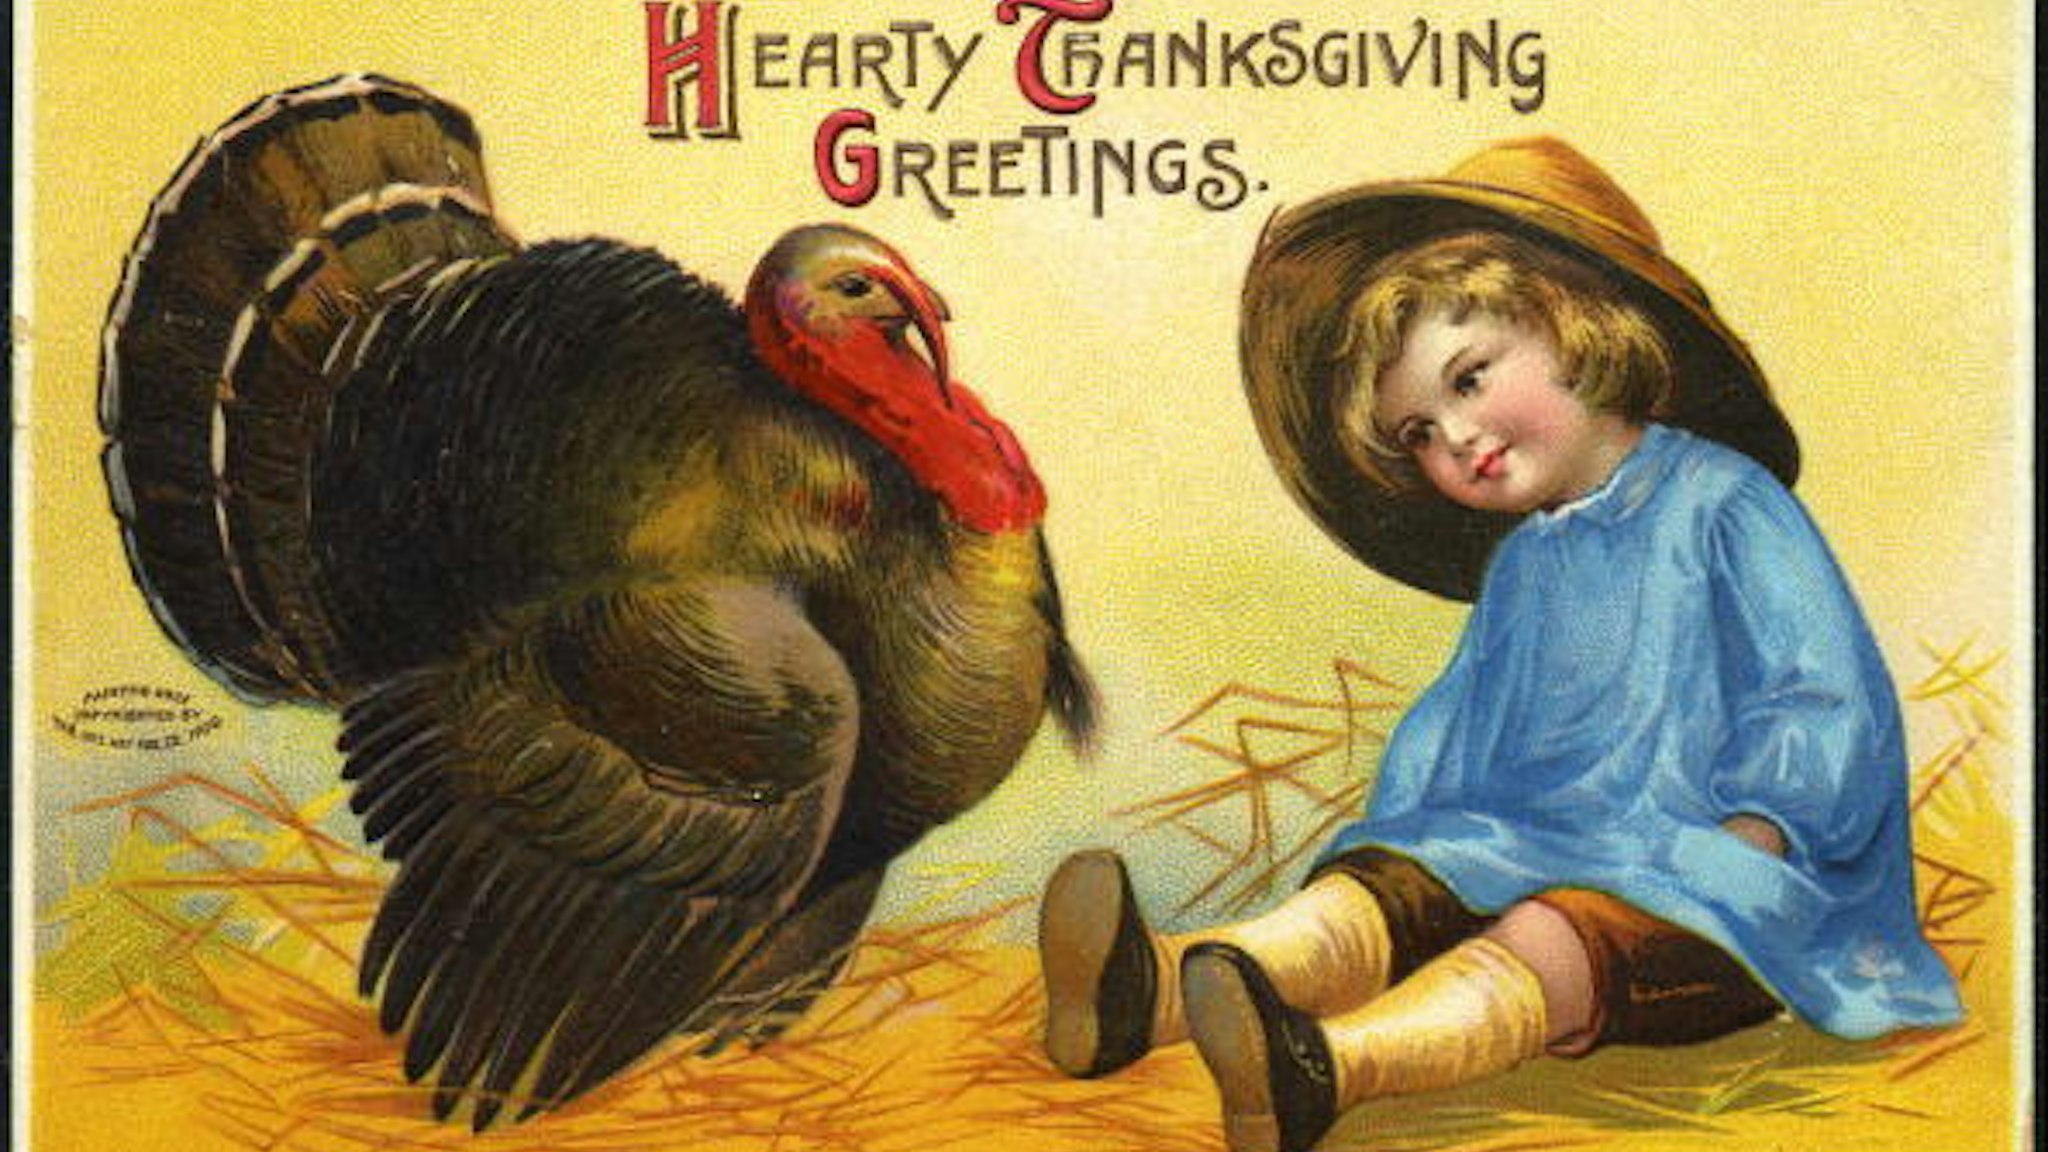 A postcard painting shows a child looking at a Thanksgiving turkey, 1909. Published by the International Art Publishing Company, the text reads 'Hearty Thanksgiving Greetings.'